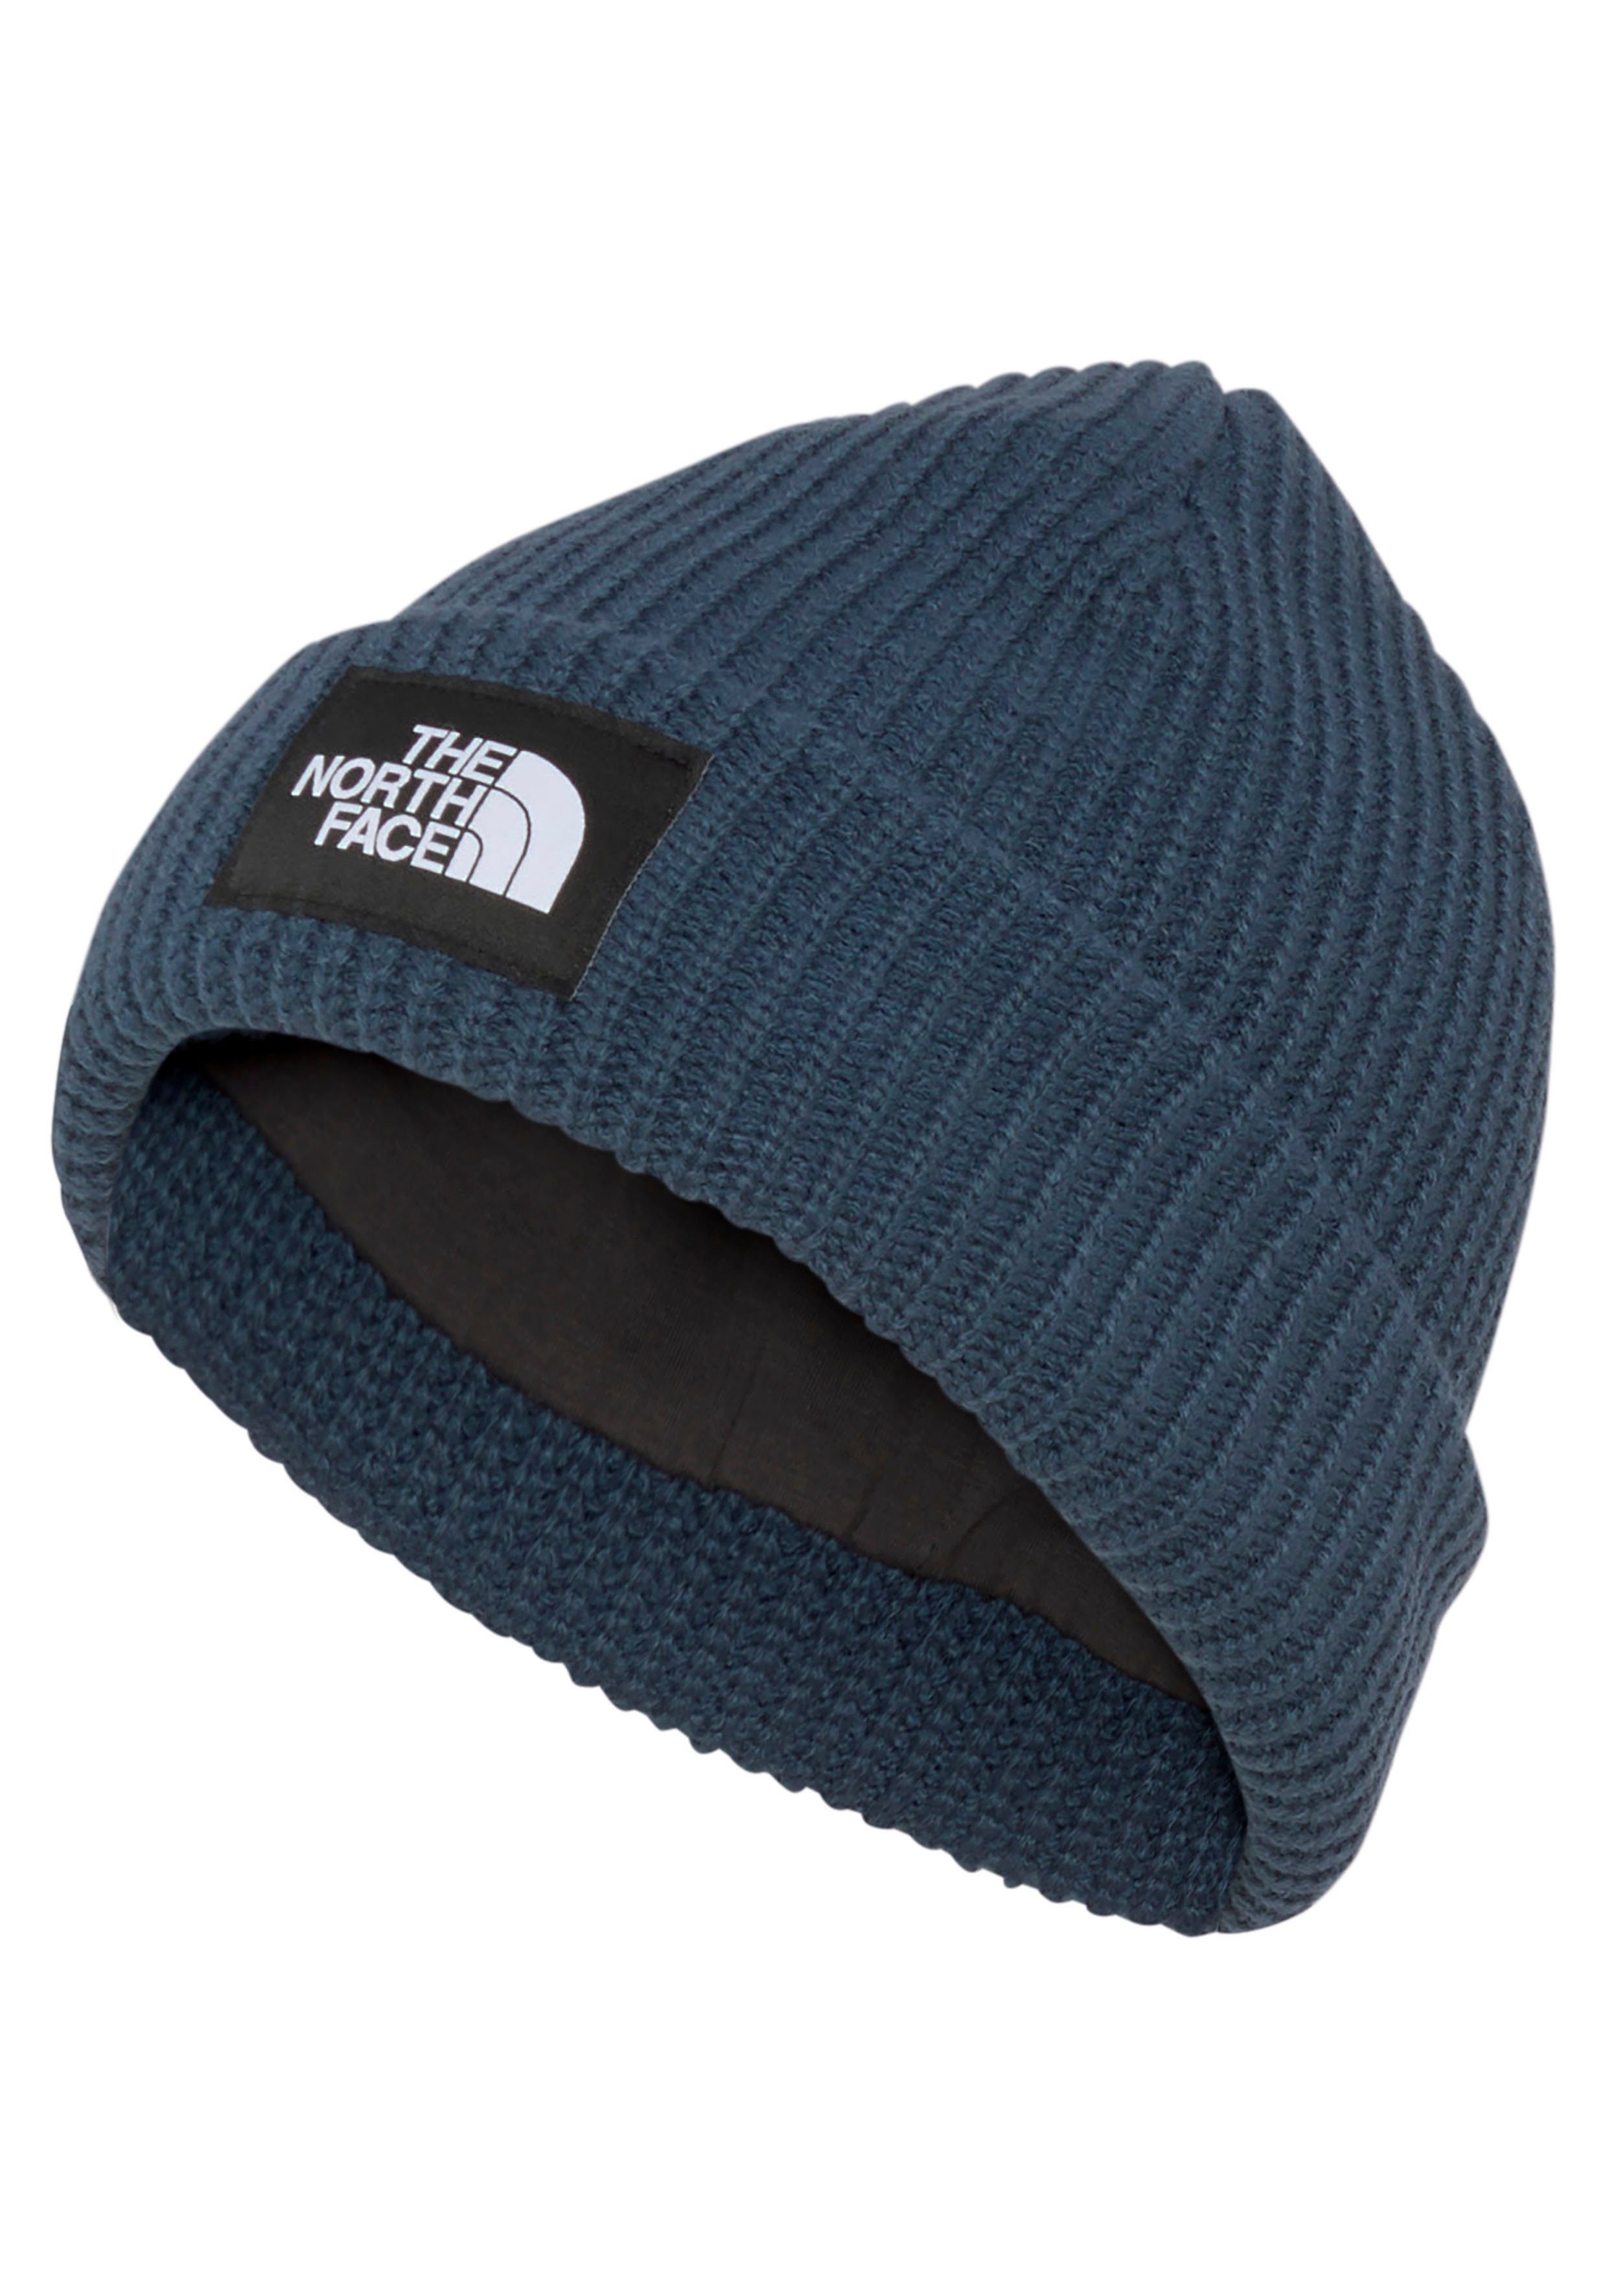 SALTY BEANIE Strickmütze LINED Face North The